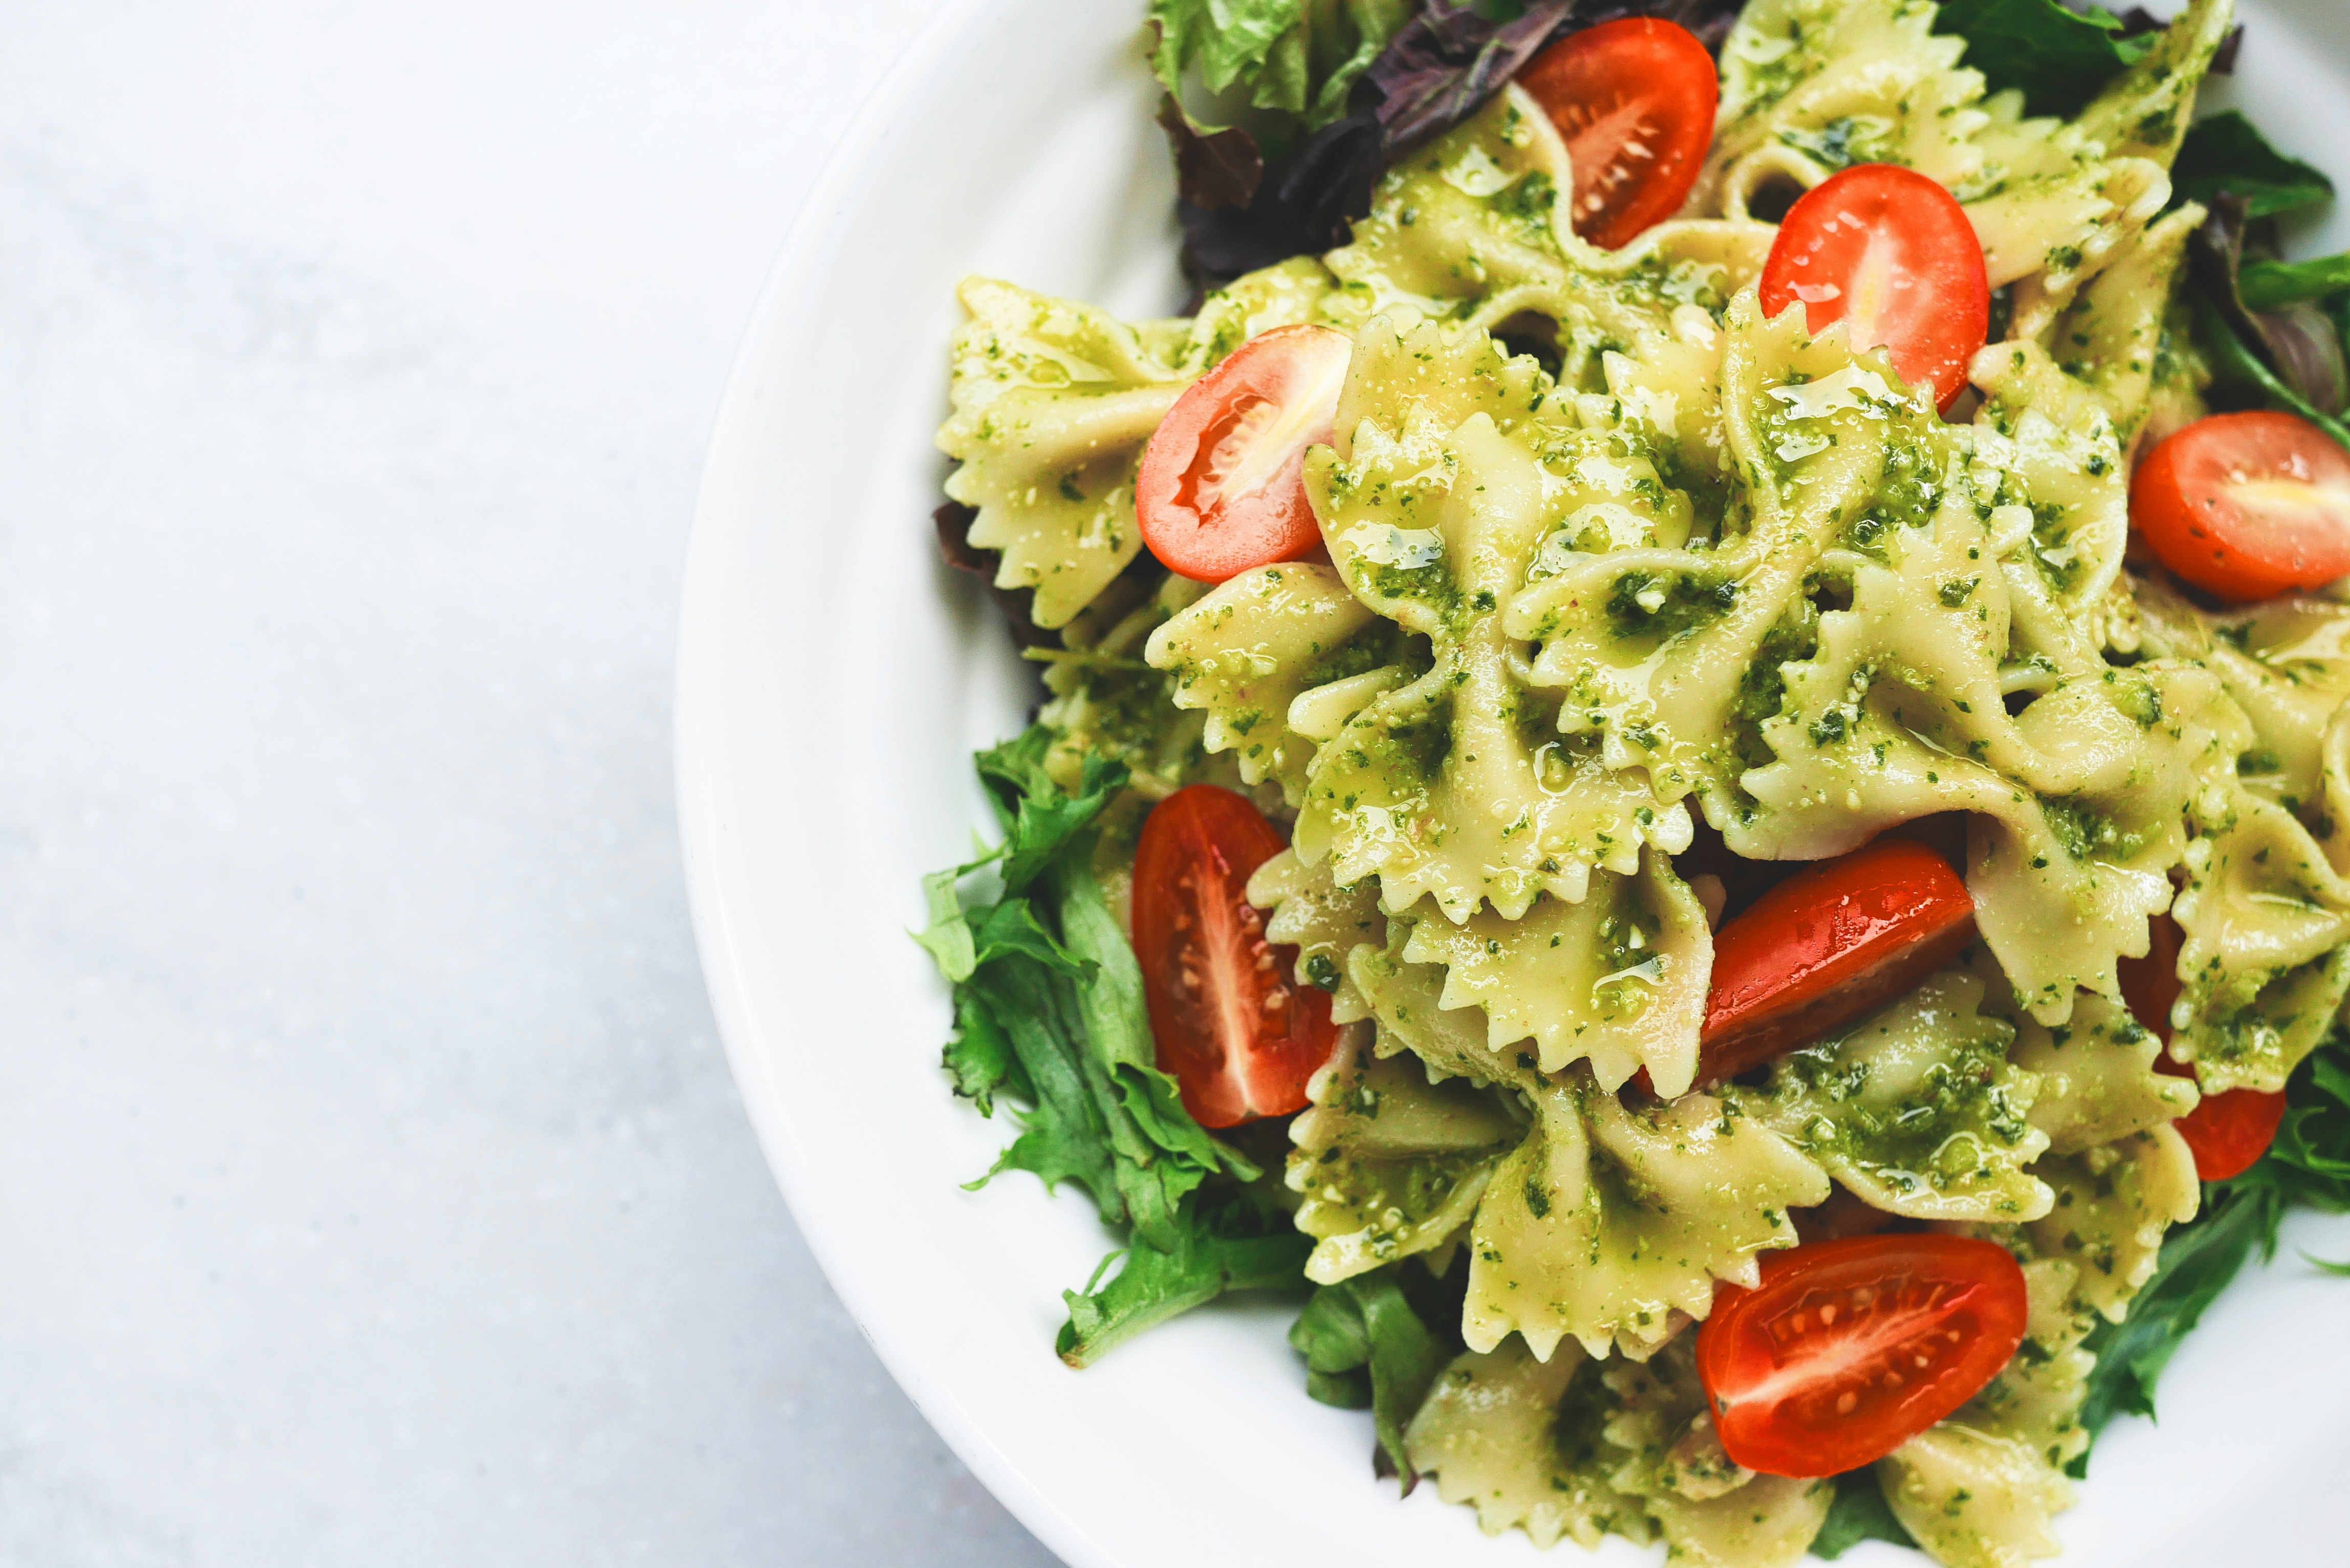 A plate of bow tie pasta, cherry tomatoes, lettuce, and pesto sauce 